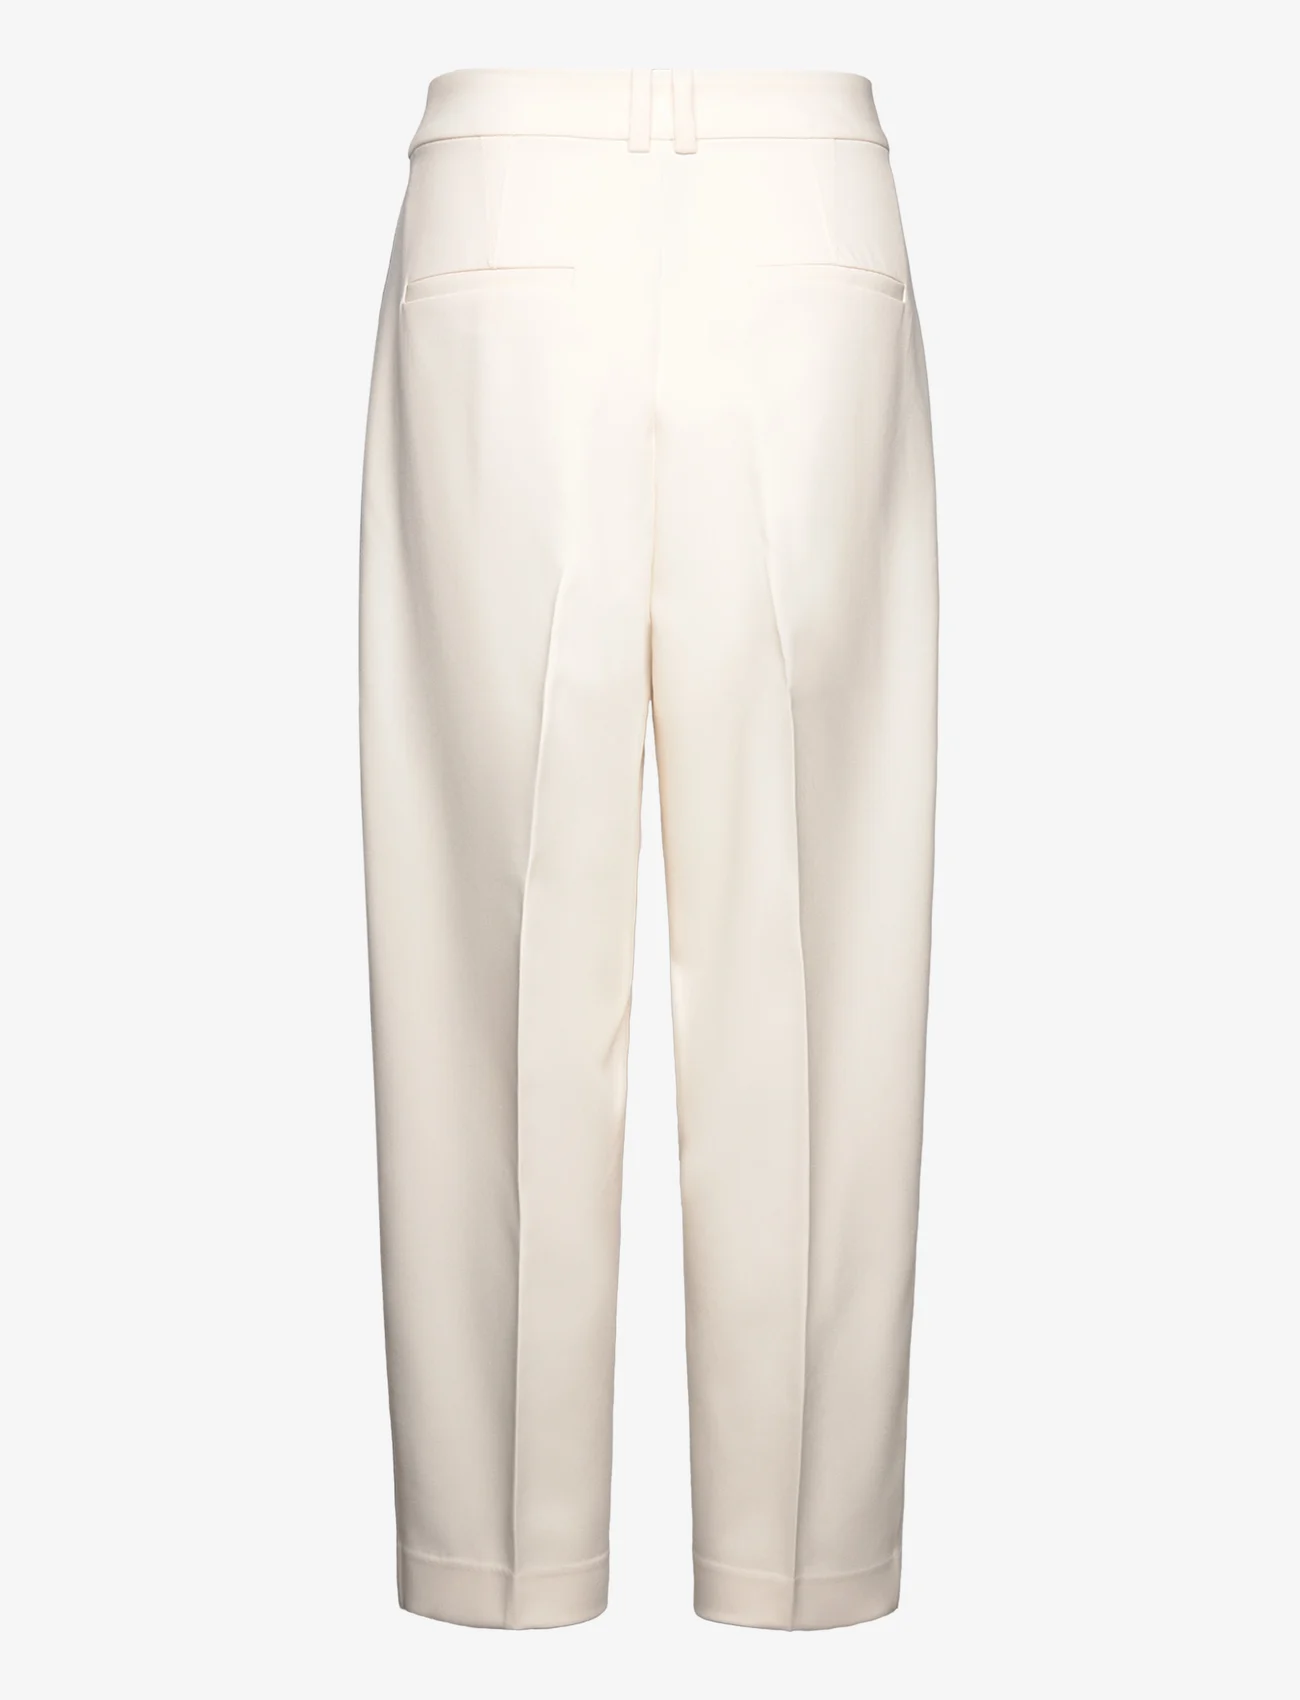 InWear - ZomaIW Barrel Pant - party wear at outlet prices - vanilla - 1